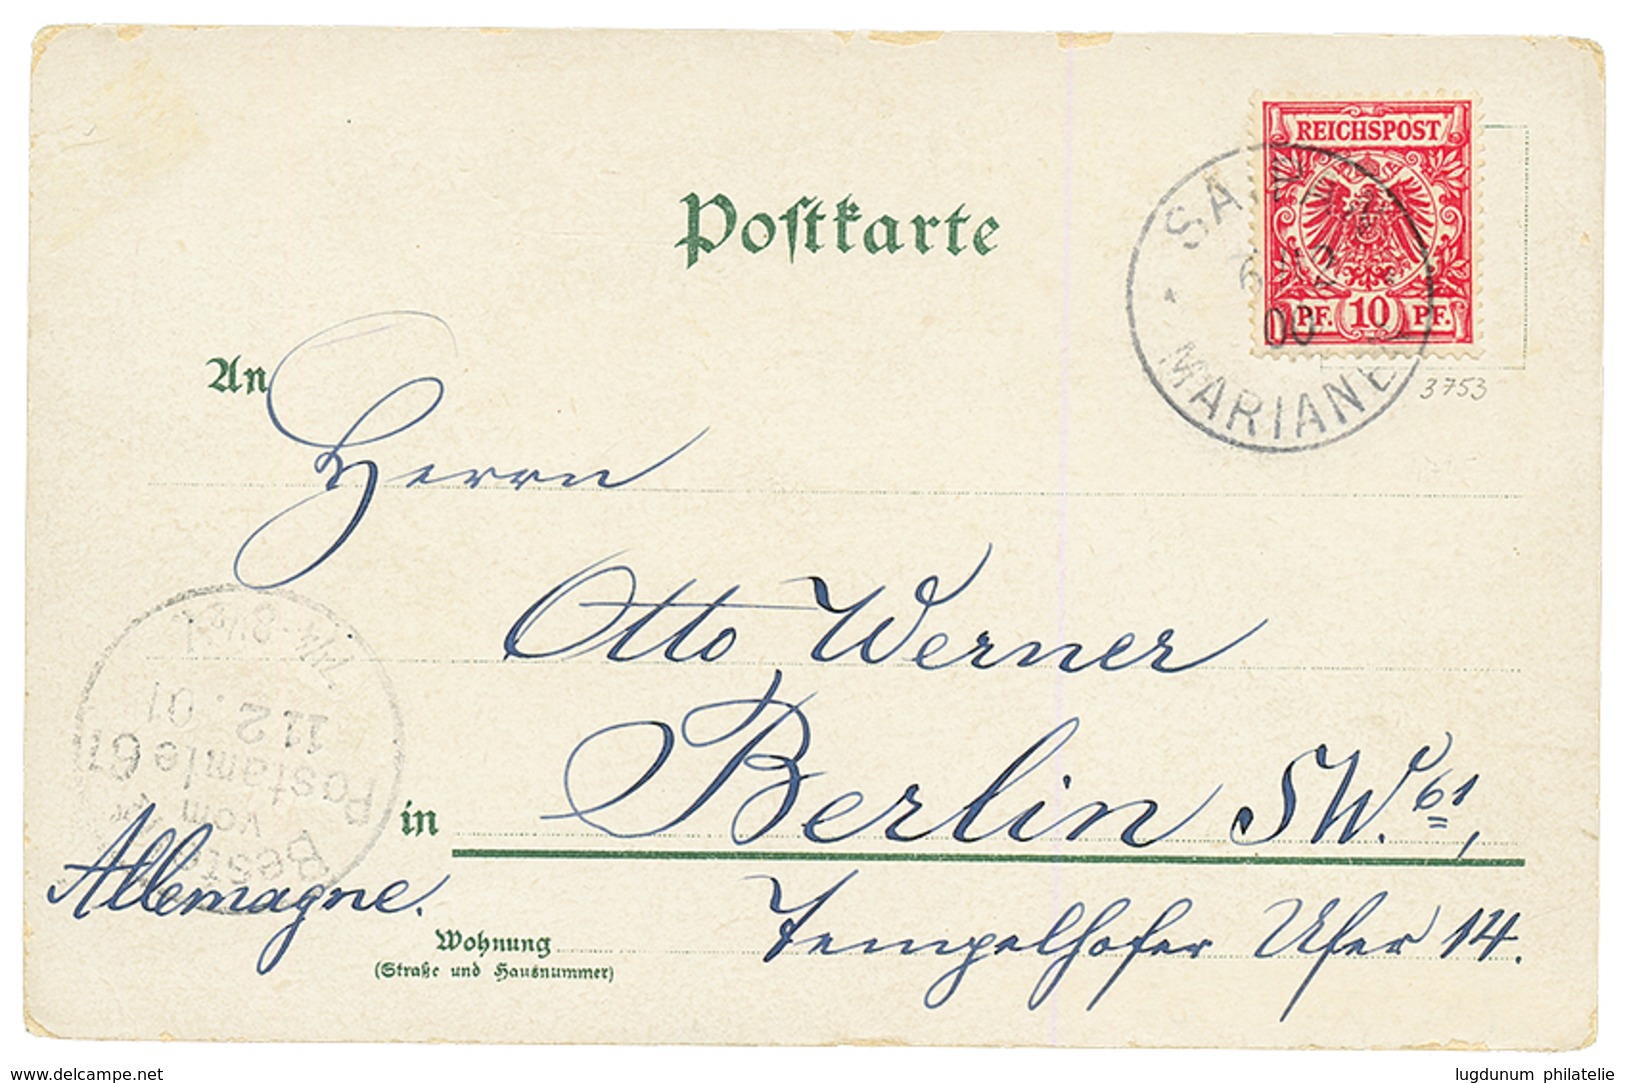 MARIANES - VORLAUFER : 1900 10pf Canc. SAIPAN MARIANEN On Card To BERLIN With Arrival Cds. RARE. Vf. - Isole Marianne